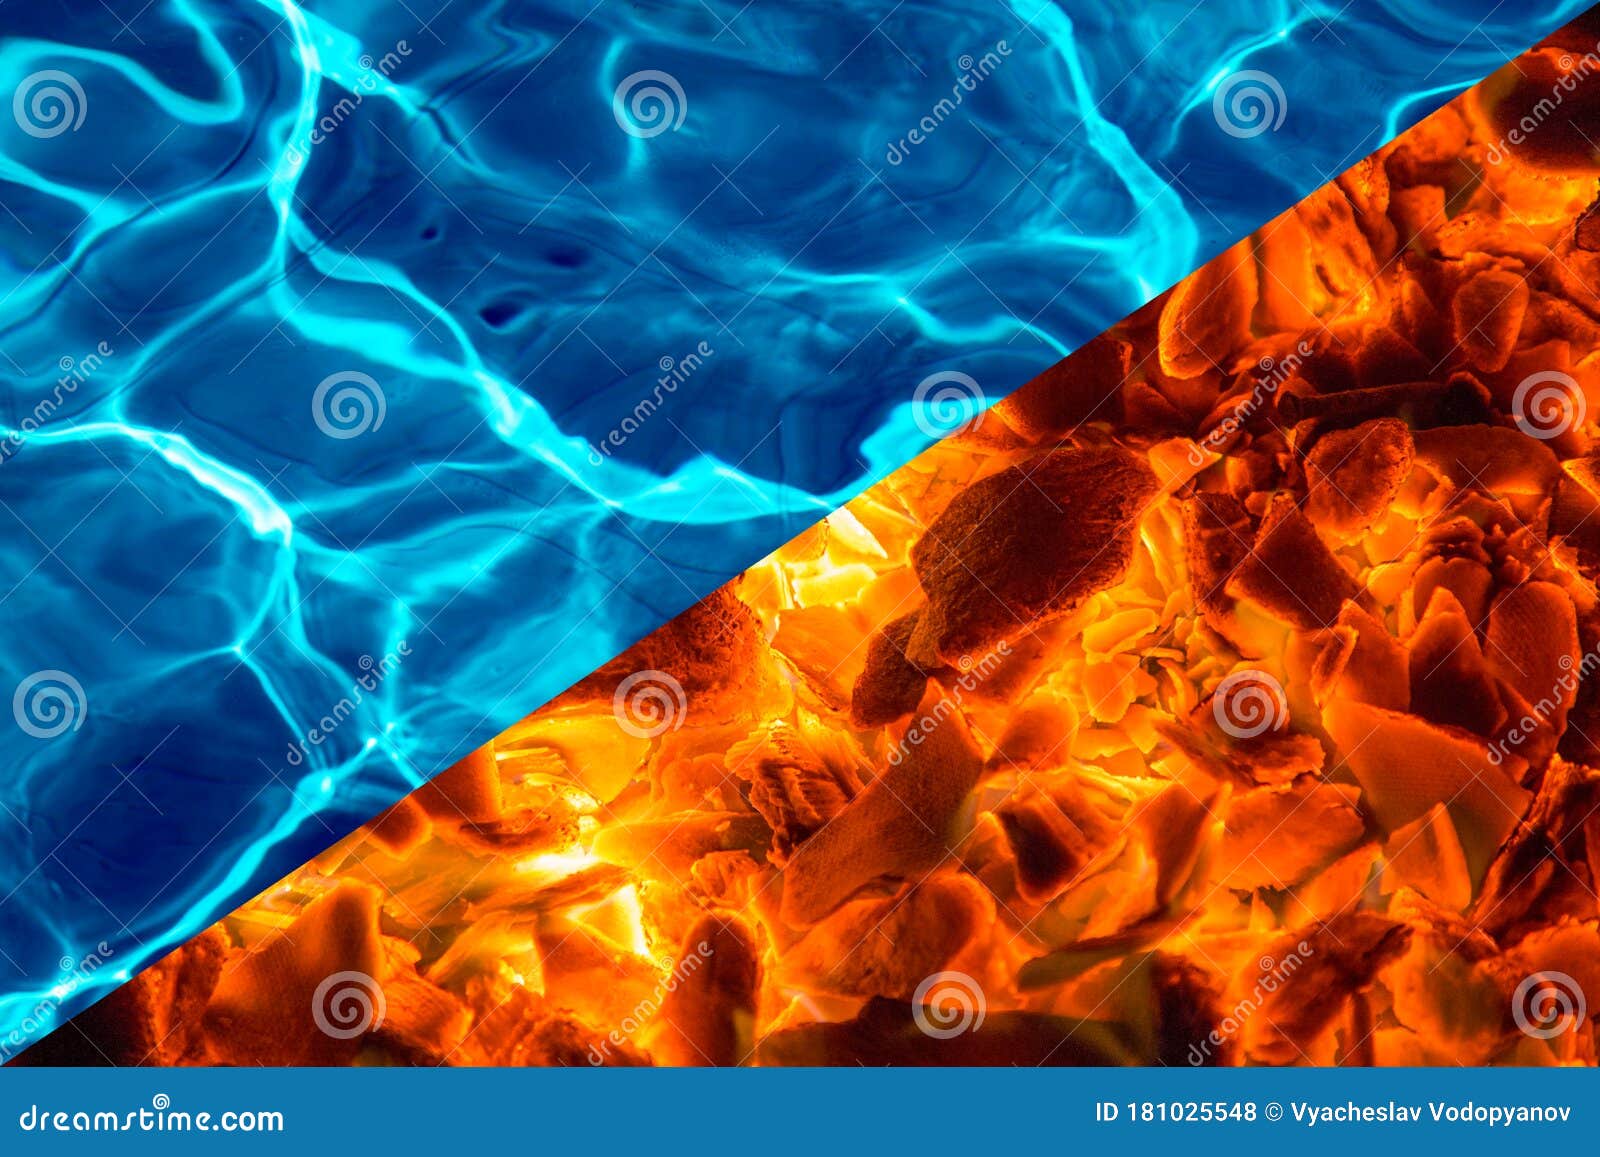 Hot Red Coals. Blue Water Background Texture. Background Texture of Fire  and Water Stock Photo - Image of ripple, charcoal: 181025548